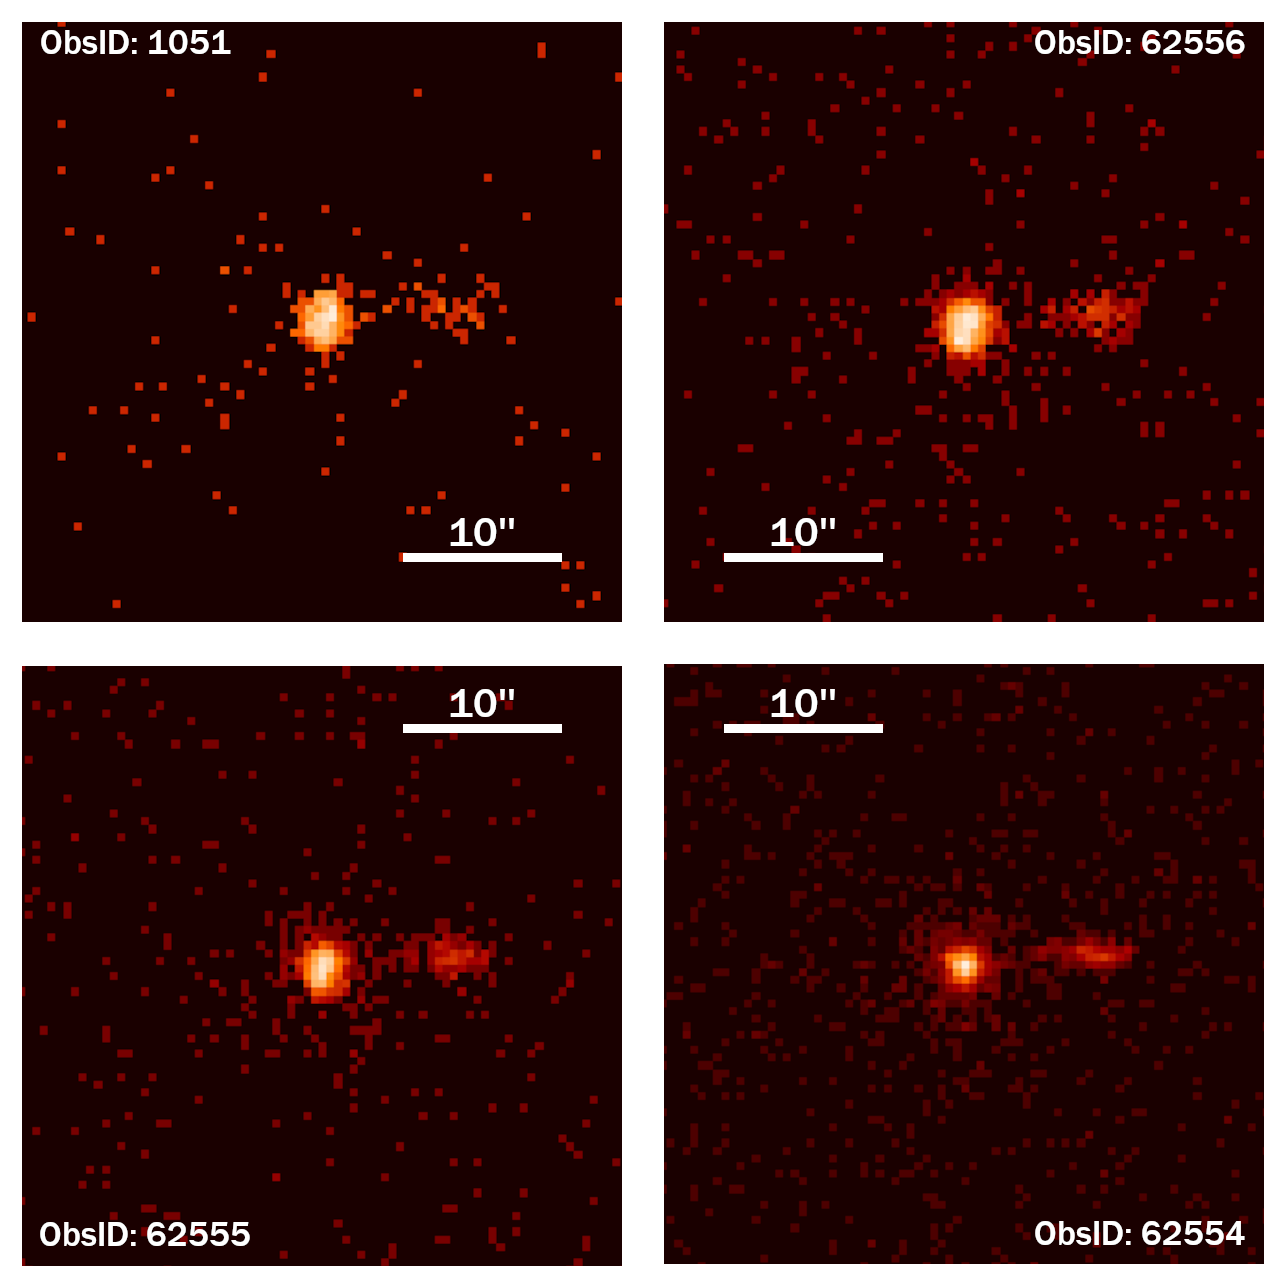 Four panels, arranged in a square, all showing similar scenes. They all have black backgrounds with reddish-orange pixels showing a small point source with a fuzzy, slightly linear extension to the right. Scale bars indicate that these panels are all around 45 arcseconds on a side. ObsID labels are also included on each panel.